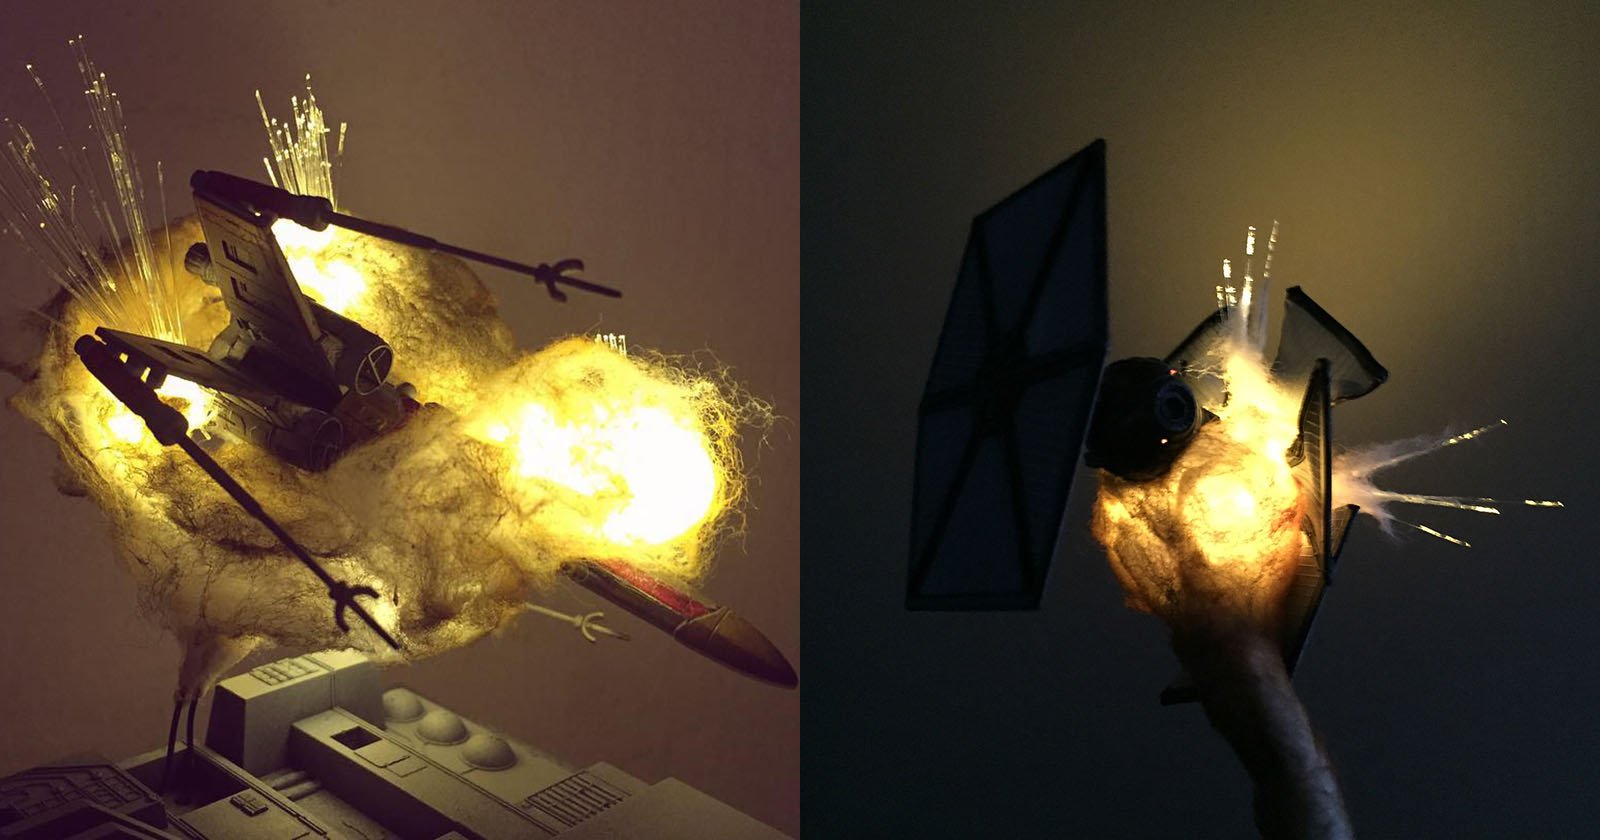 These Exploding Star Wars Ships Were Shot with Cotton and LEDs